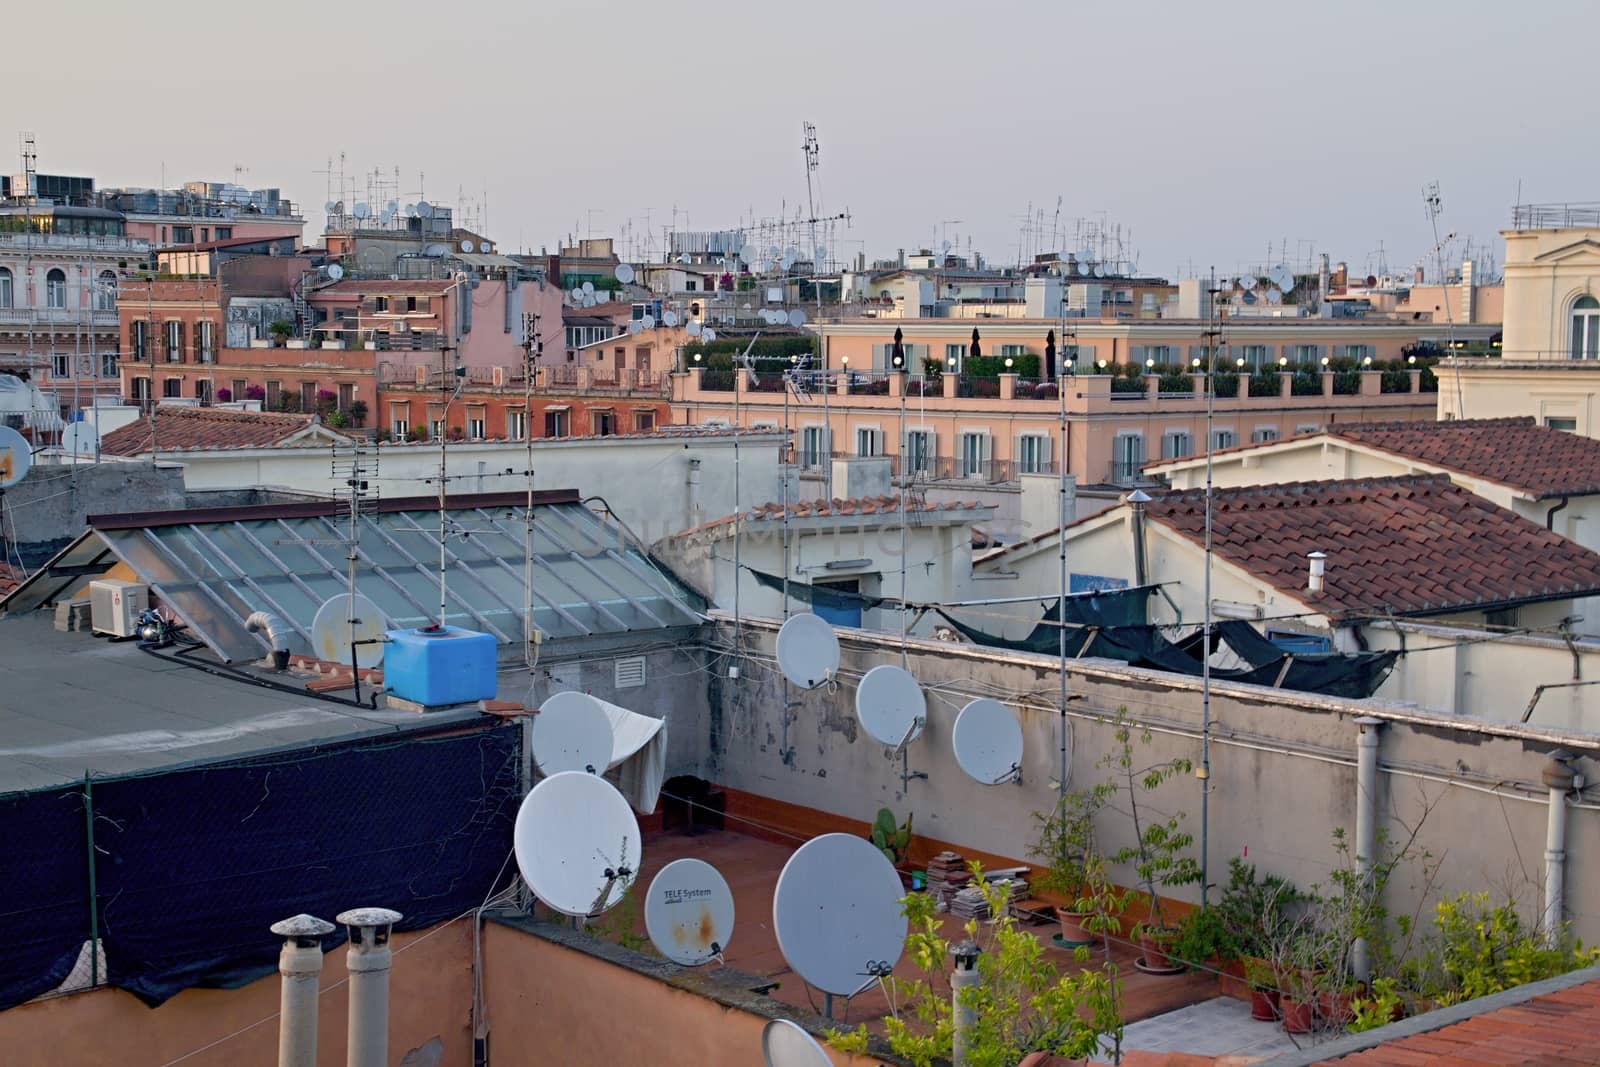 Photo shows Rome cityscape with houses and roofs.